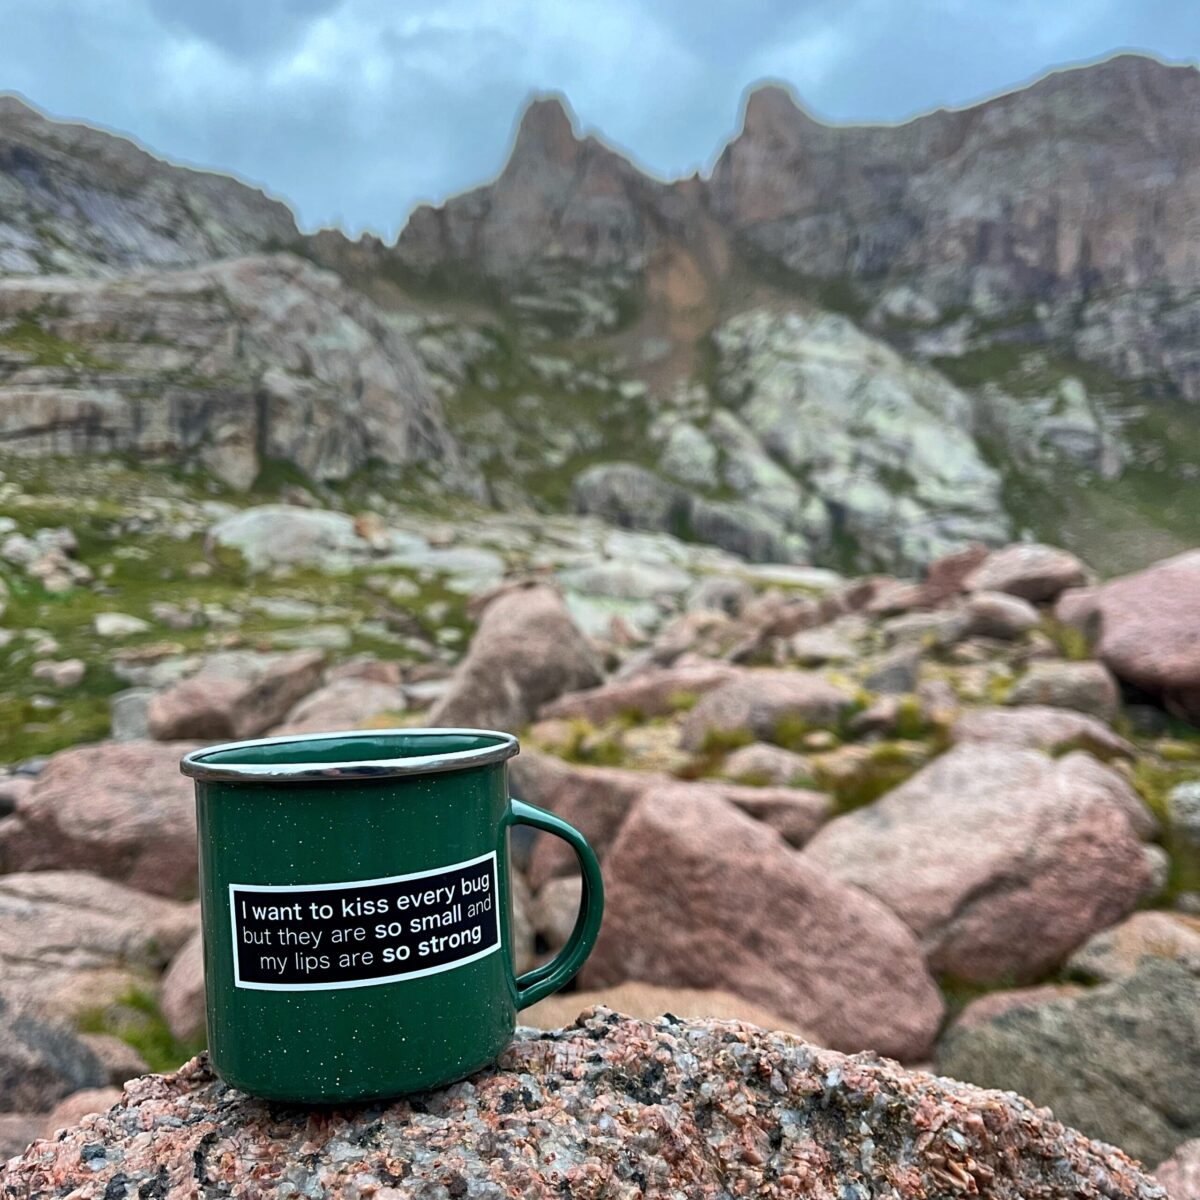 A cup of instant coffee in a beautiful alpine meadow surrounded by 13,000ft mountains